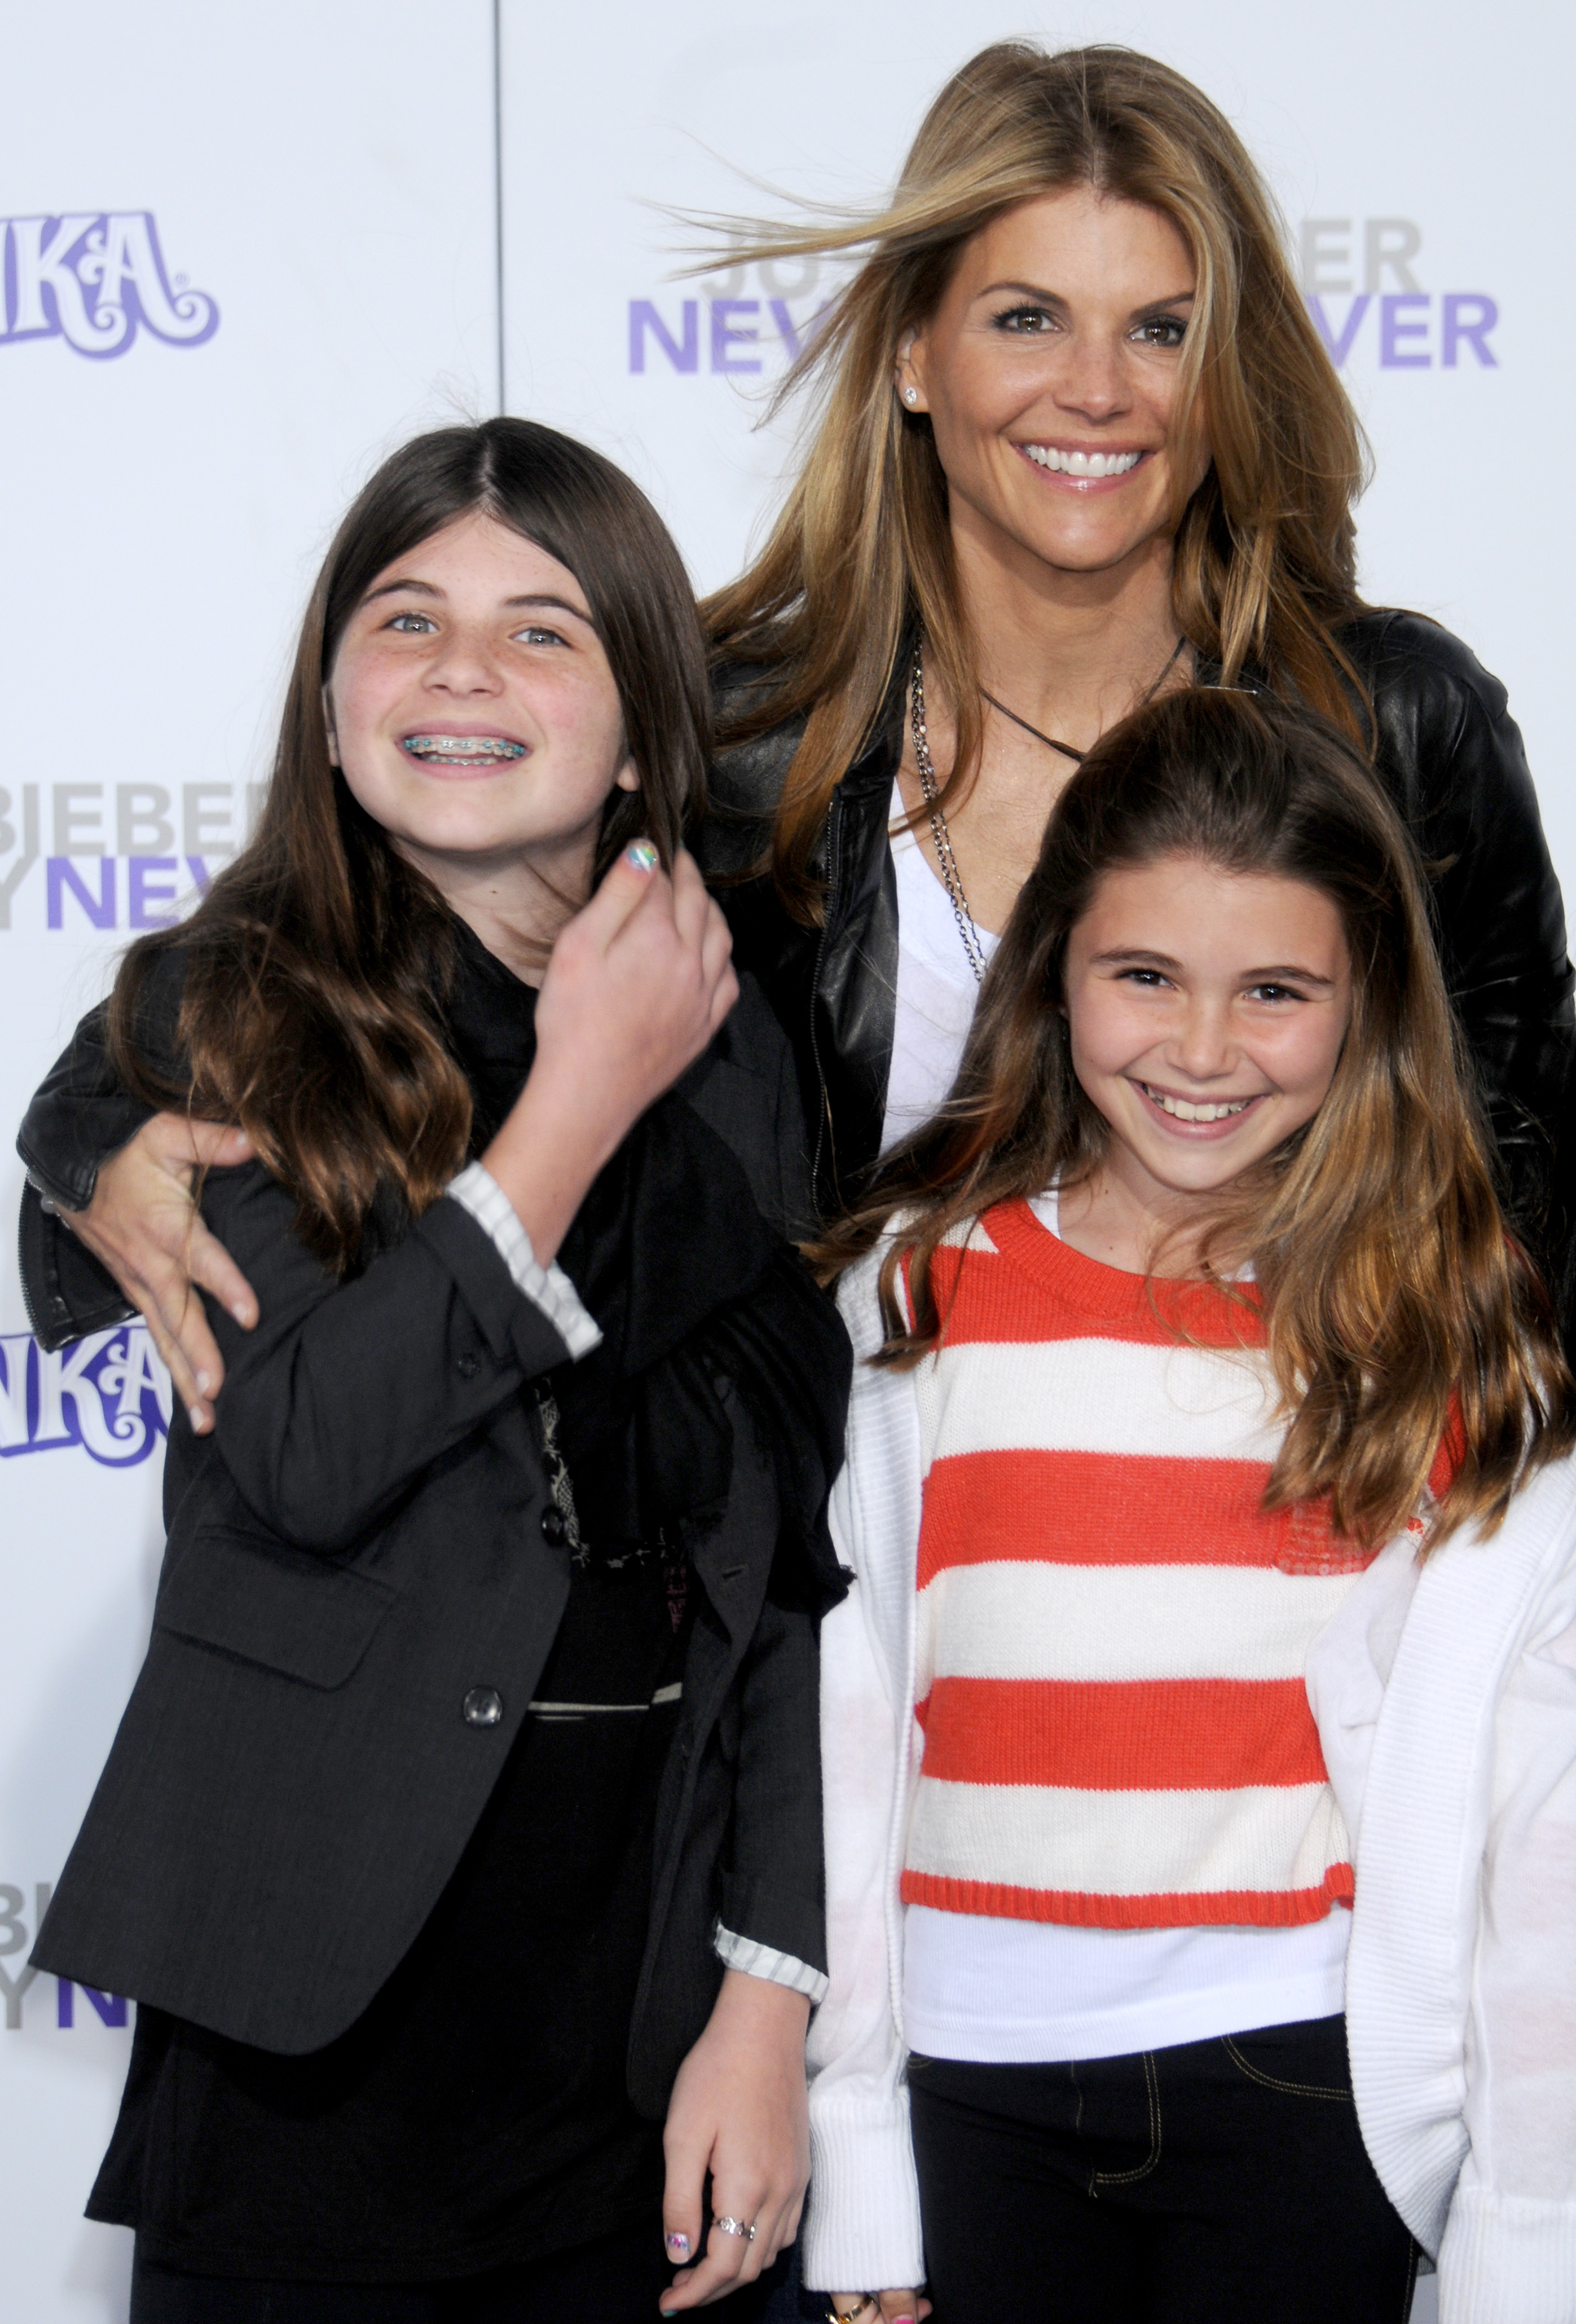 Lori Loughlin and daughter's Isabella Rose and Olivia Jade at the premiere of "Justin Bieber: Never Say Never" on February 8, 2011 in Los Angeles, California | Source: Getty Images